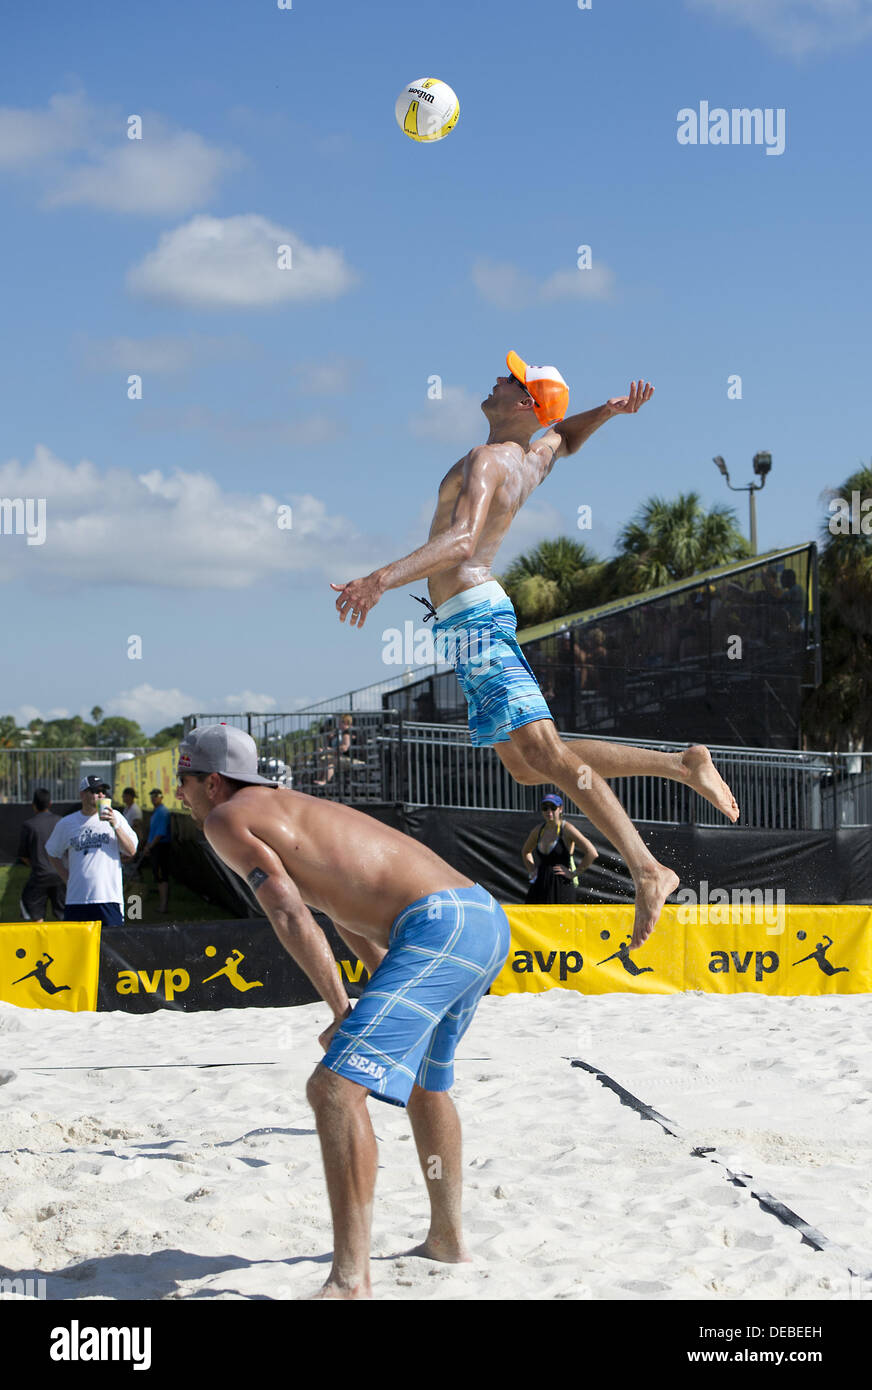 Sept. 13, 2013 - St. Petersburg, Florida, USA - St. Petersburg, FL: PHIL  DALHAUSSER leaps high with an opening game jump serve against Nils Nielsen  and Dave McKienzie in the 2013 AVP